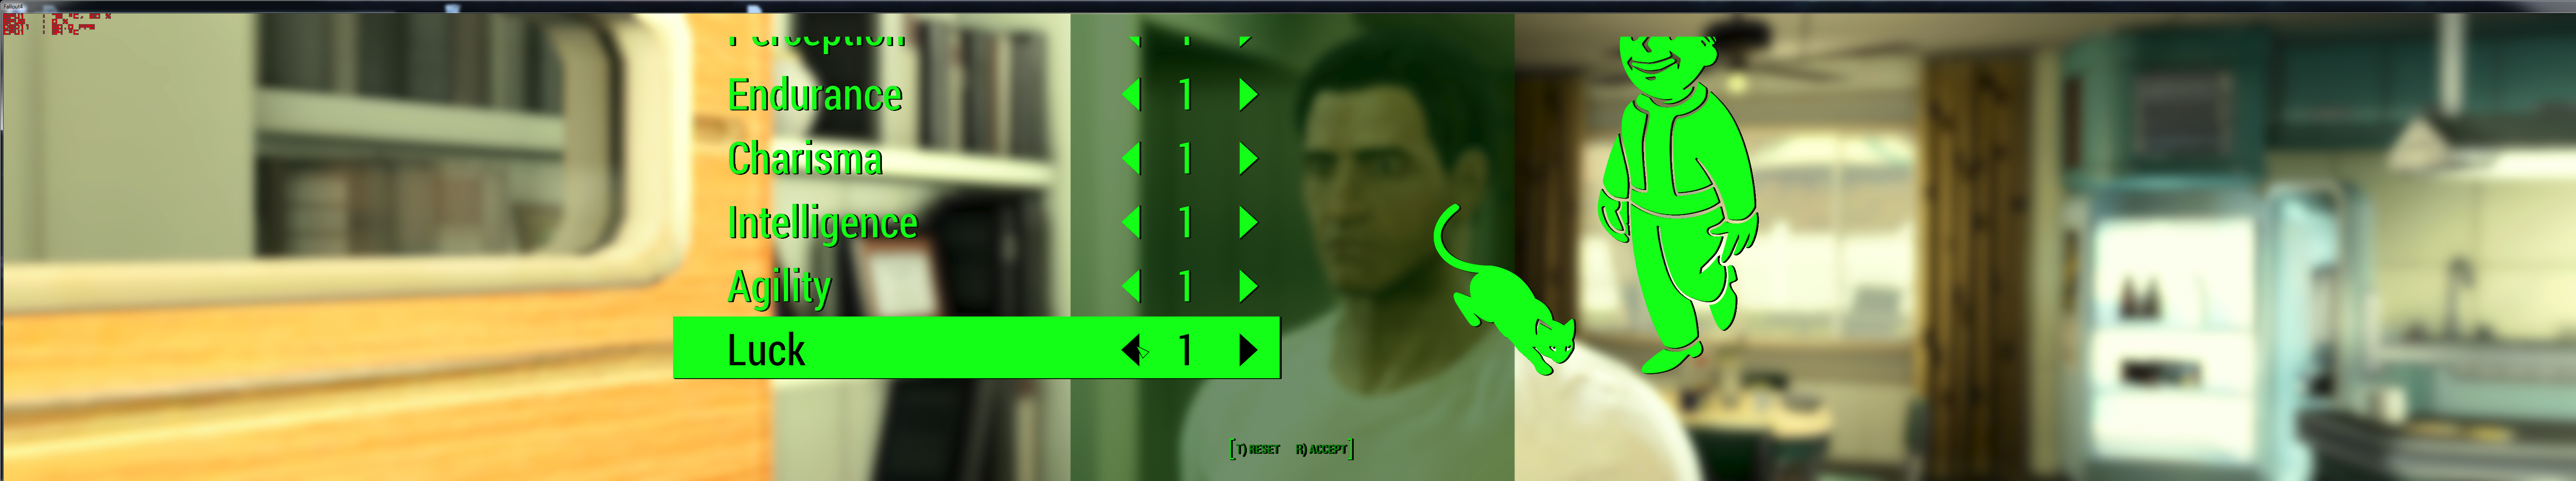 fallout 4 problem 5760x1080 Eyefinity.png